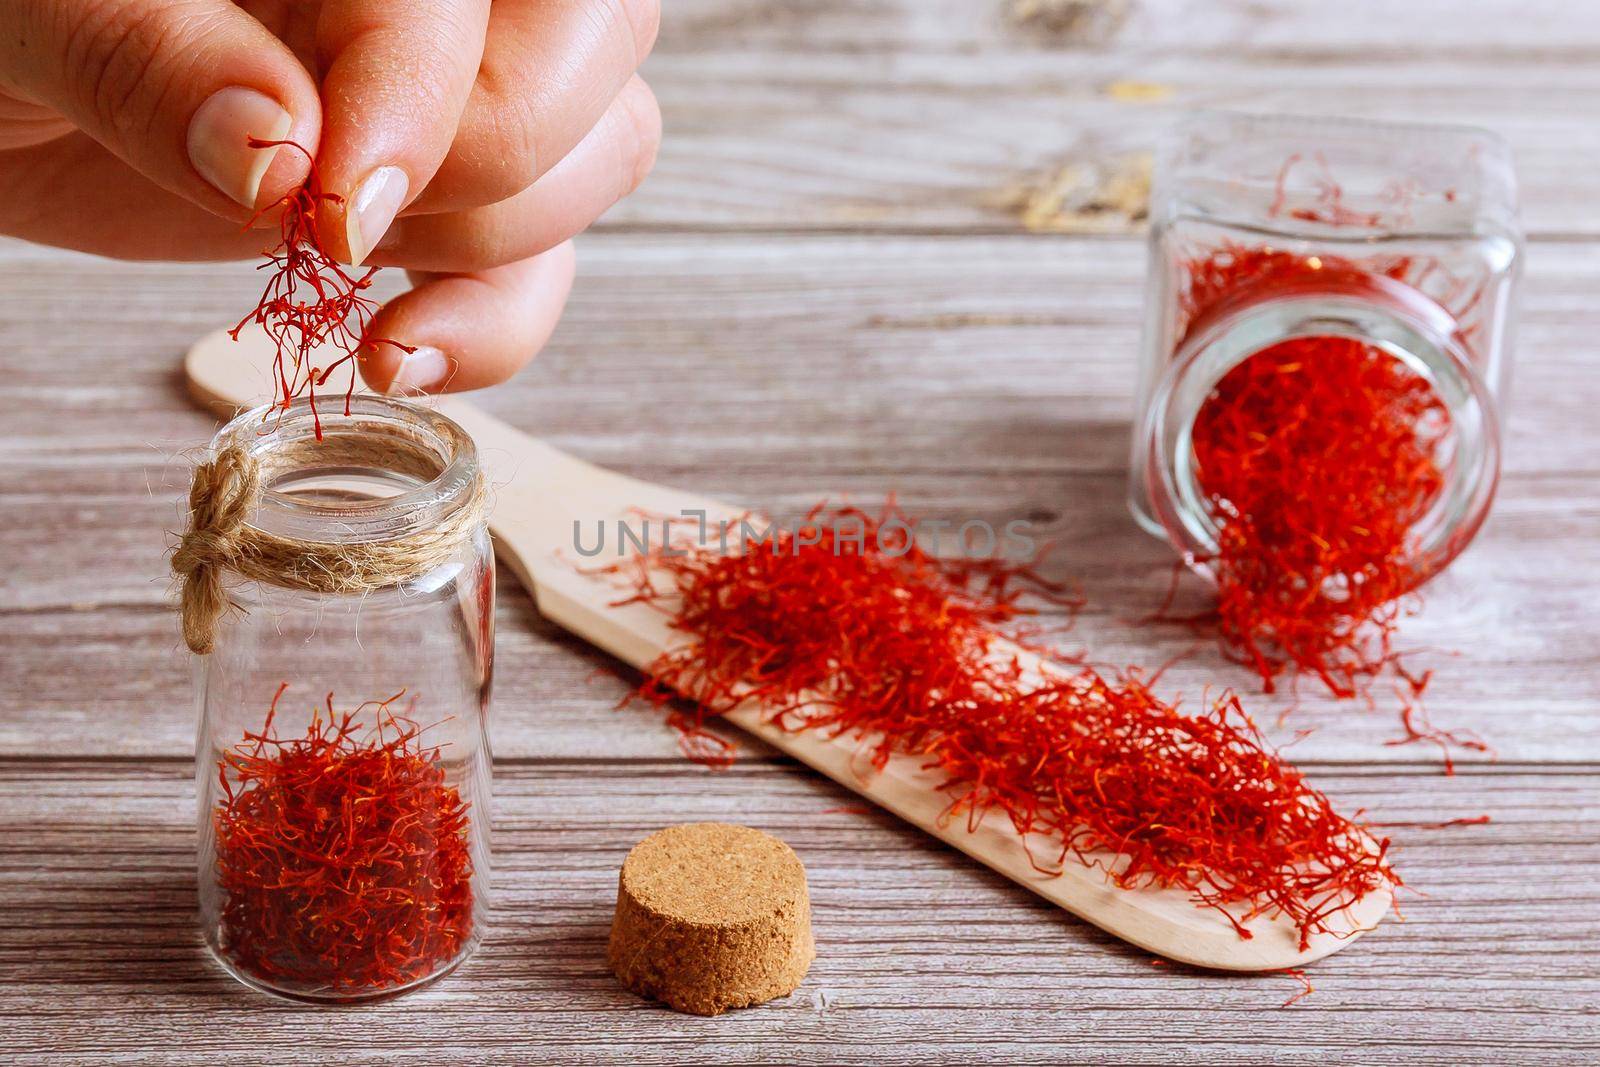 The girl puts the saffron in a glass container. Saffron spice in a glass bottle and on a wooden spoon on a wooden background.